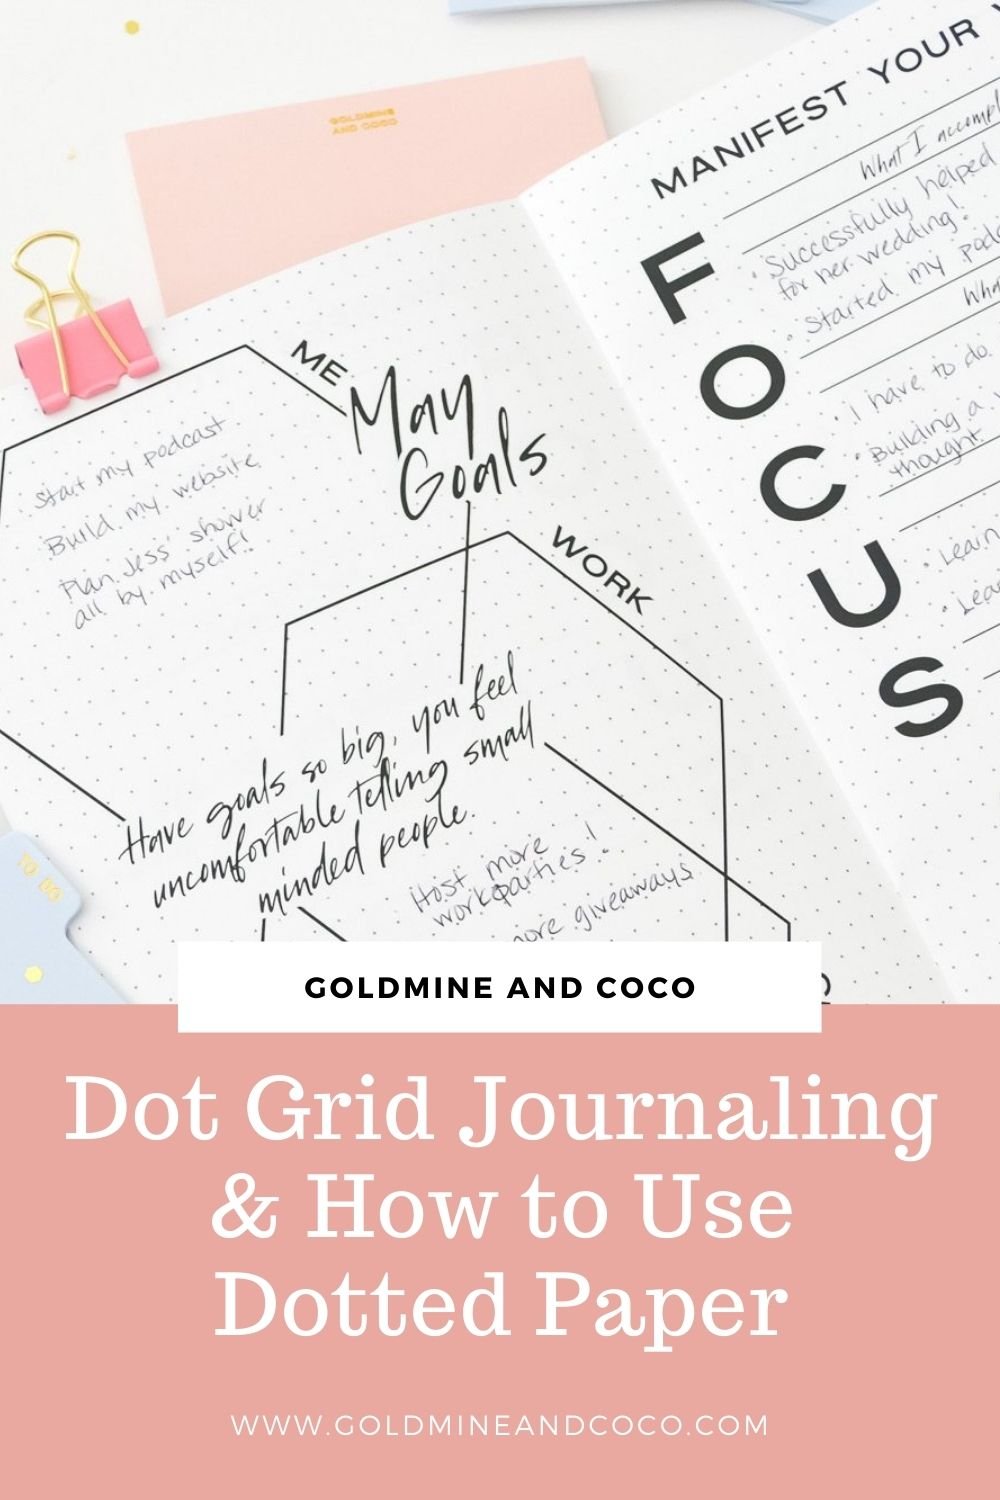 Dot Grid Journaling & The 5 Best Ways to Use Dotted Paper